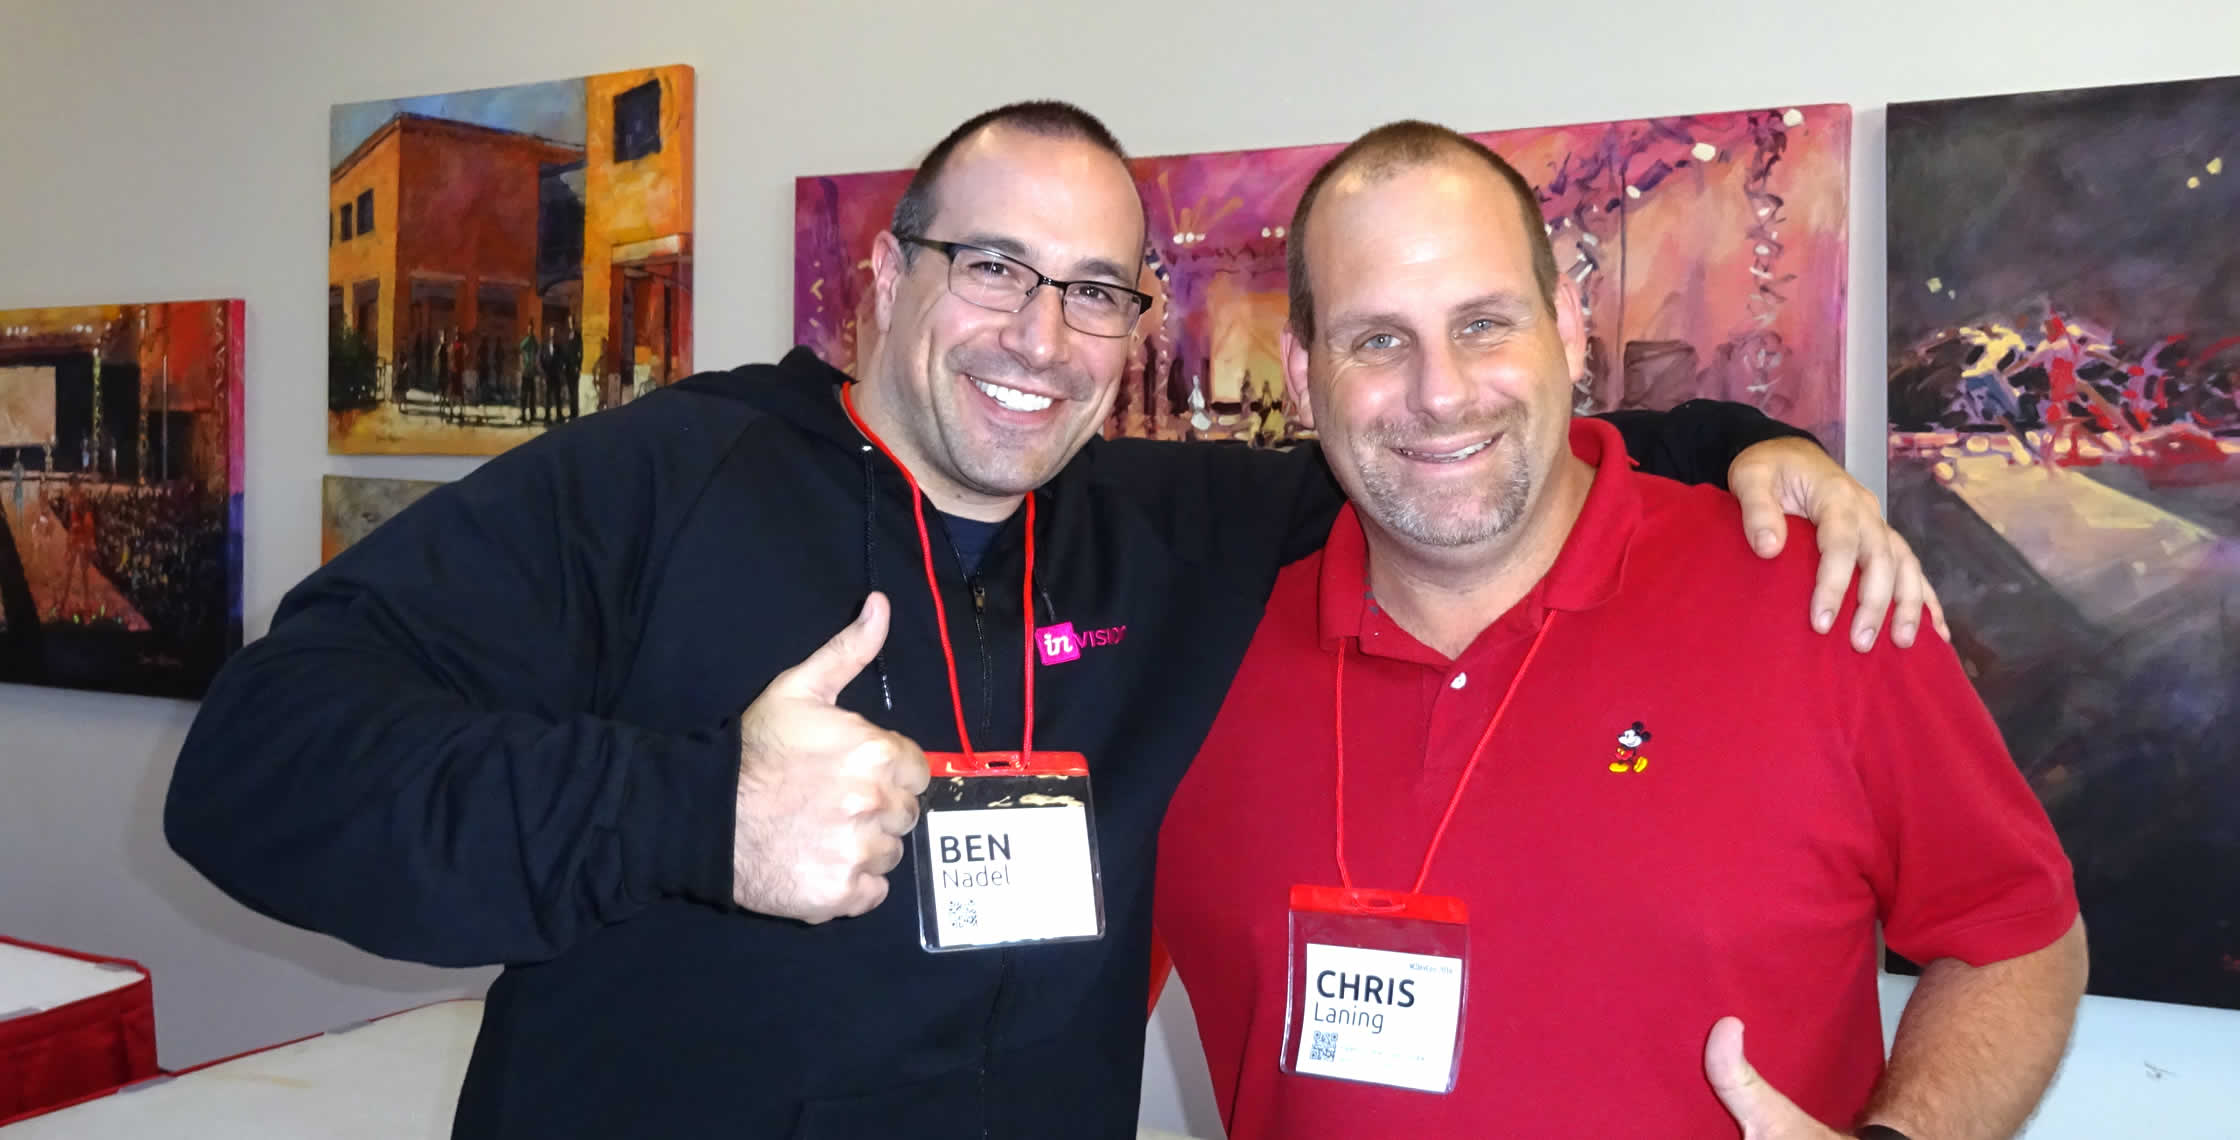 Ben Nadel at NCDevCon 2016 (Raleigh, NC) with: Chris Laning